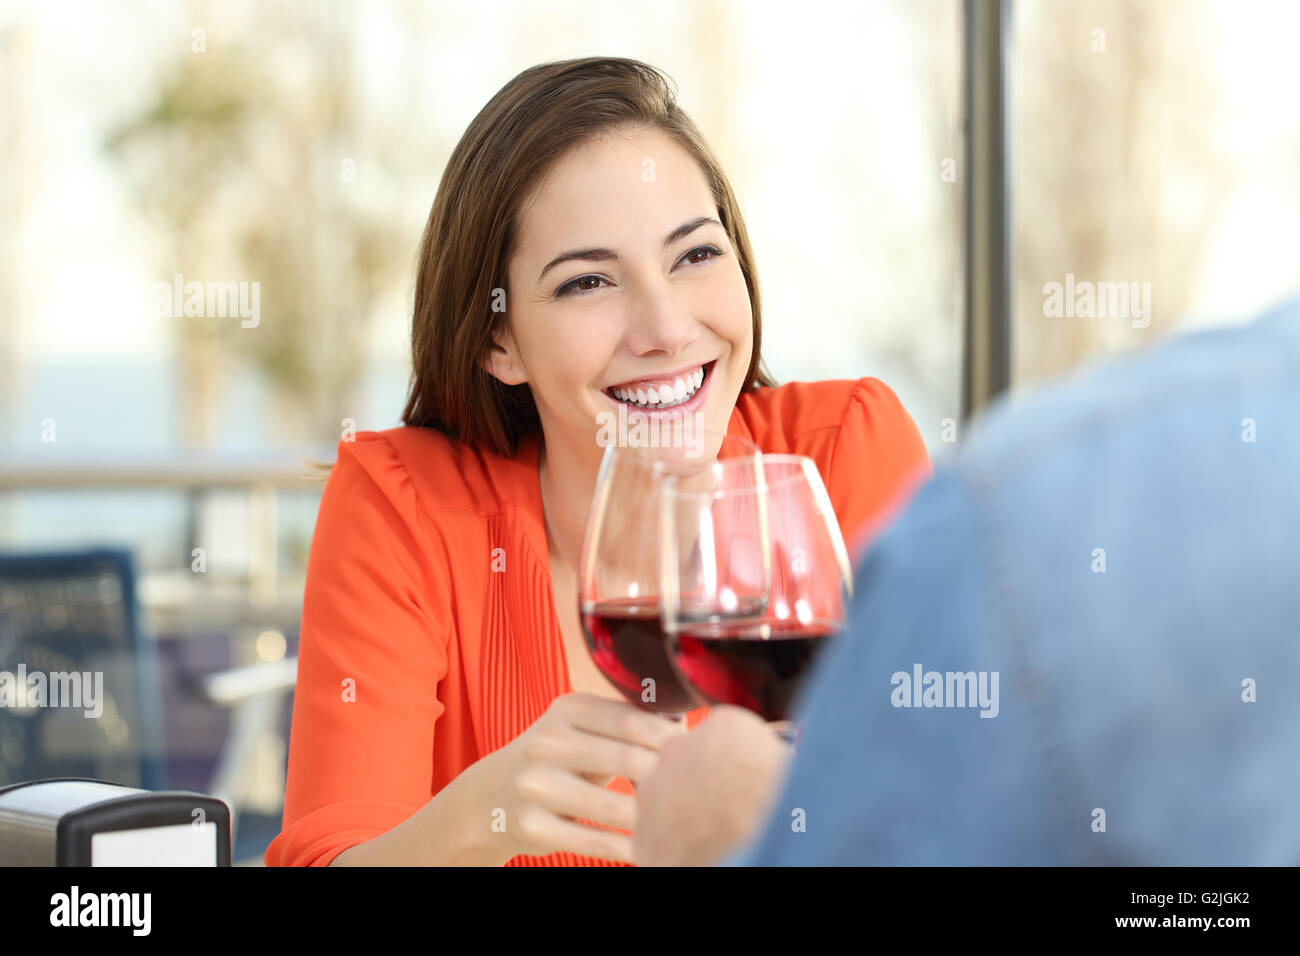 Happy woman toasting with red wine with her partner or friend during a date in a coffee shop interior with a window Stock Photo